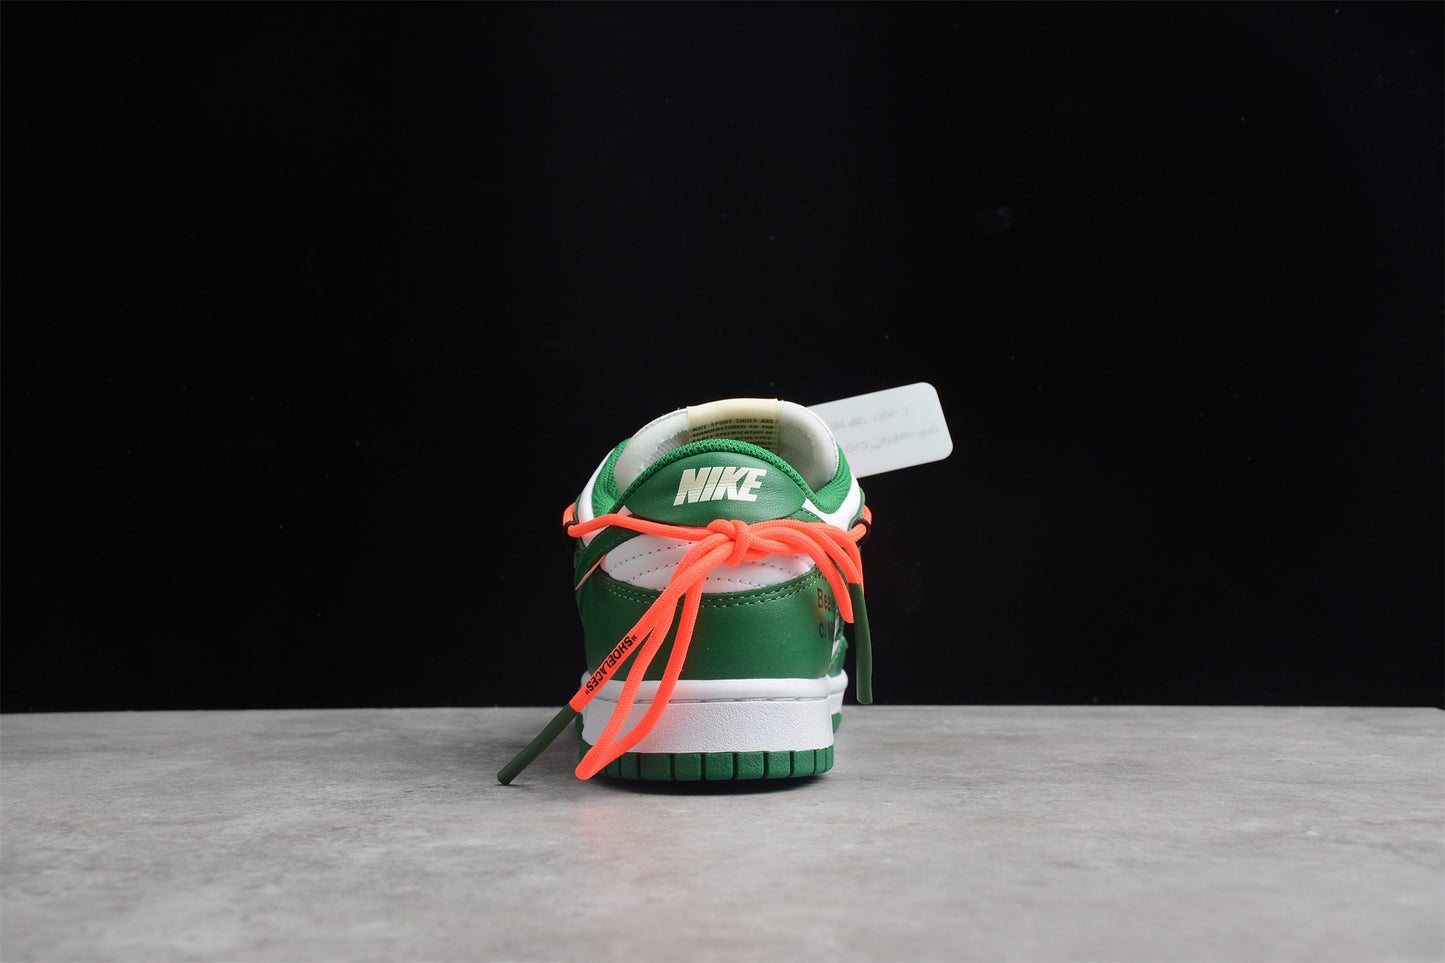 OFF-WHITE x Nike Dunk Low - GREEN